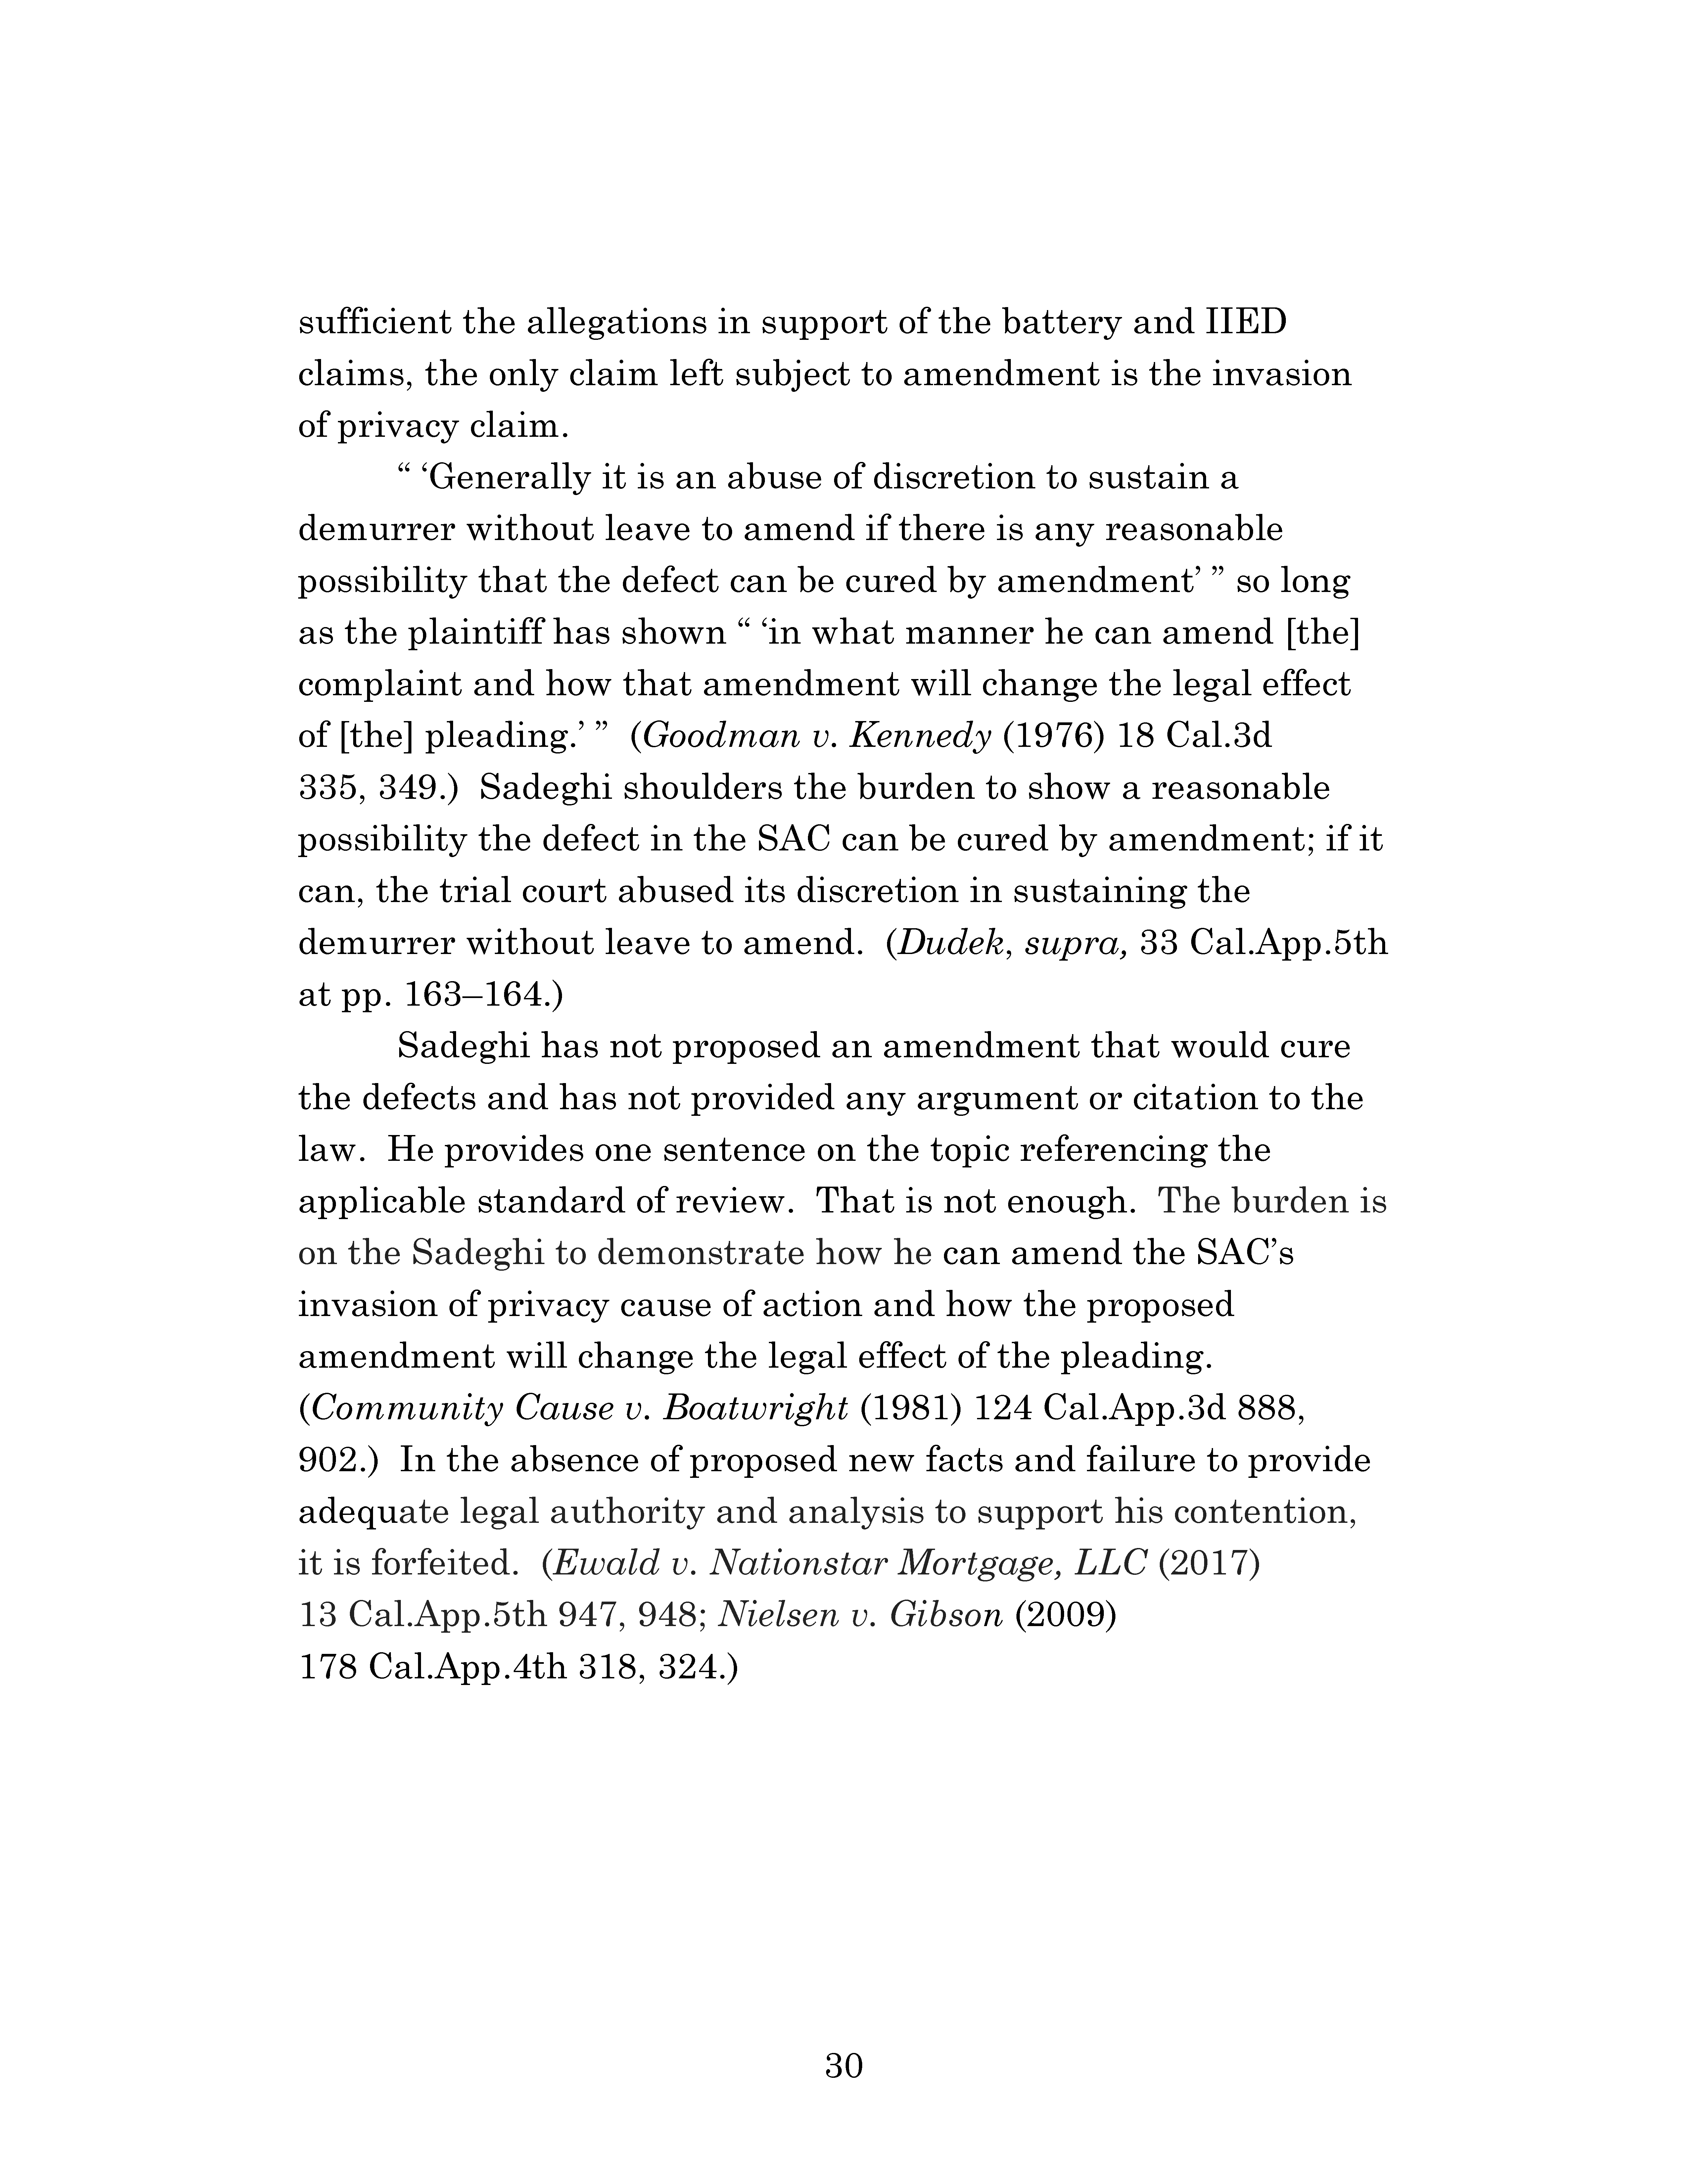 Appellate Court's Opinion Upholding Sadeghi's Claims for Battery and IIED Against Chen, Hu and Kung Page 30